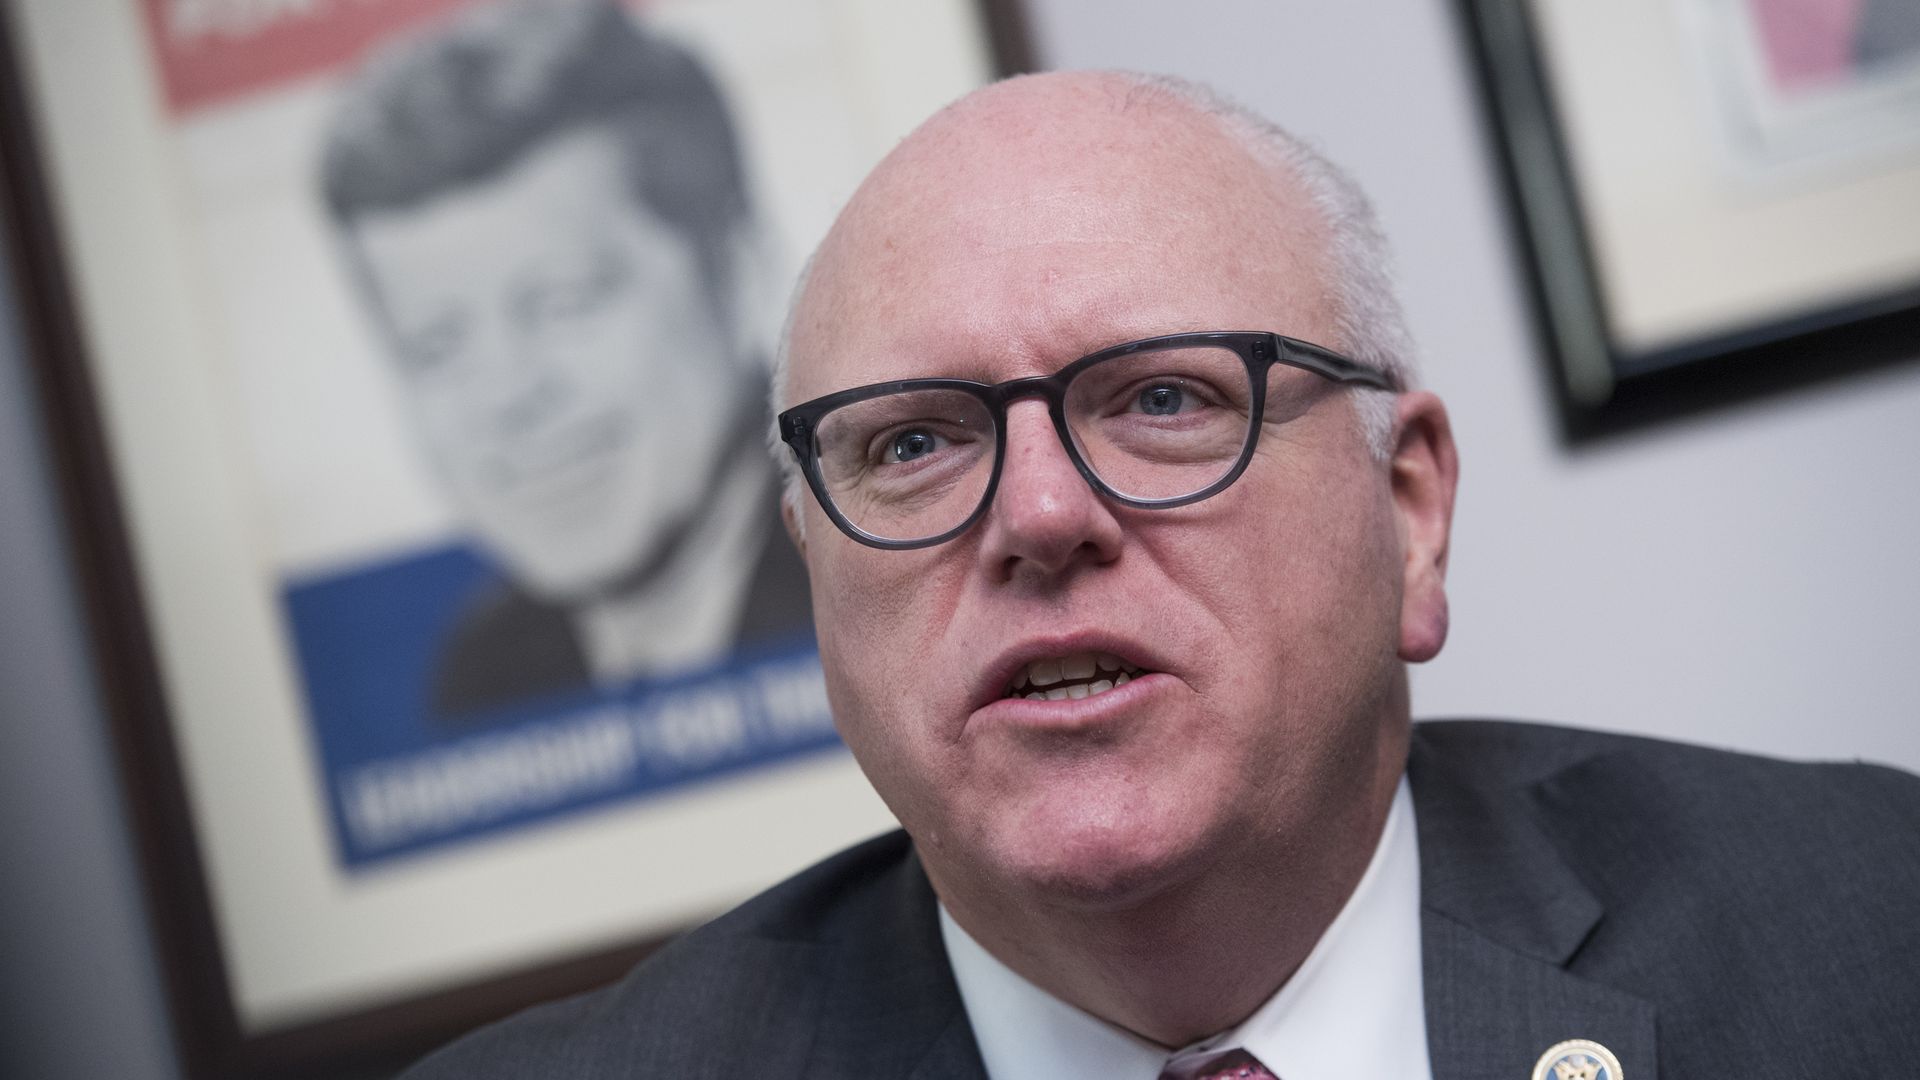 Former Rep. Joe Crowley is seen speaking in front of a "JFK for President" campaign poster.